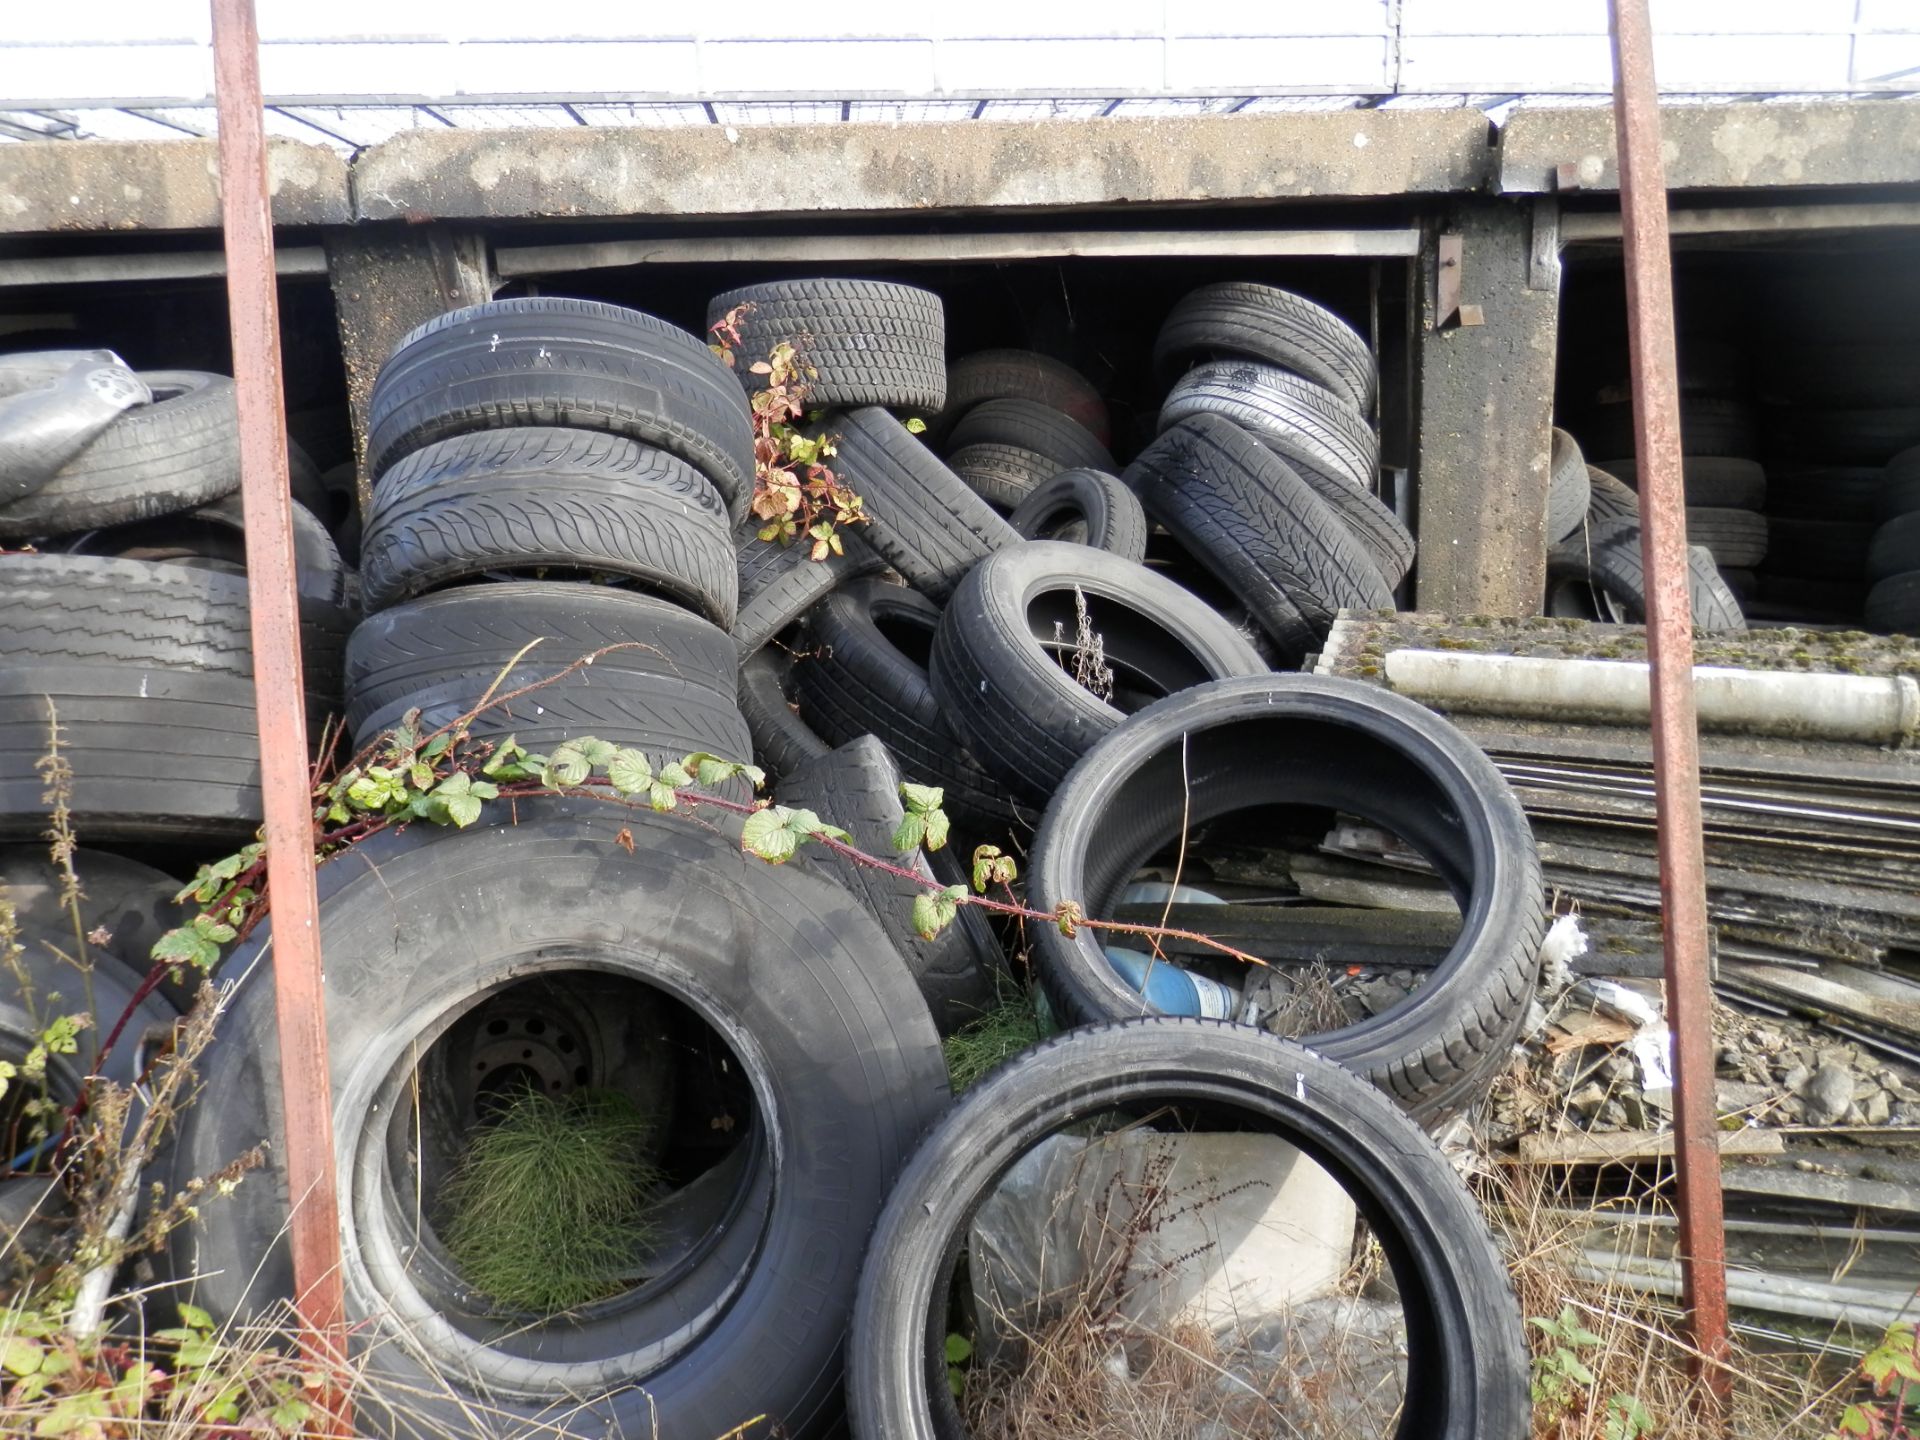 3 GARAGES FULL OF USED, PART WORN TYRES. ASSORTED FROM CAR TO LORRY TYRES. POSSIBLY 800+ - Image 2 of 8